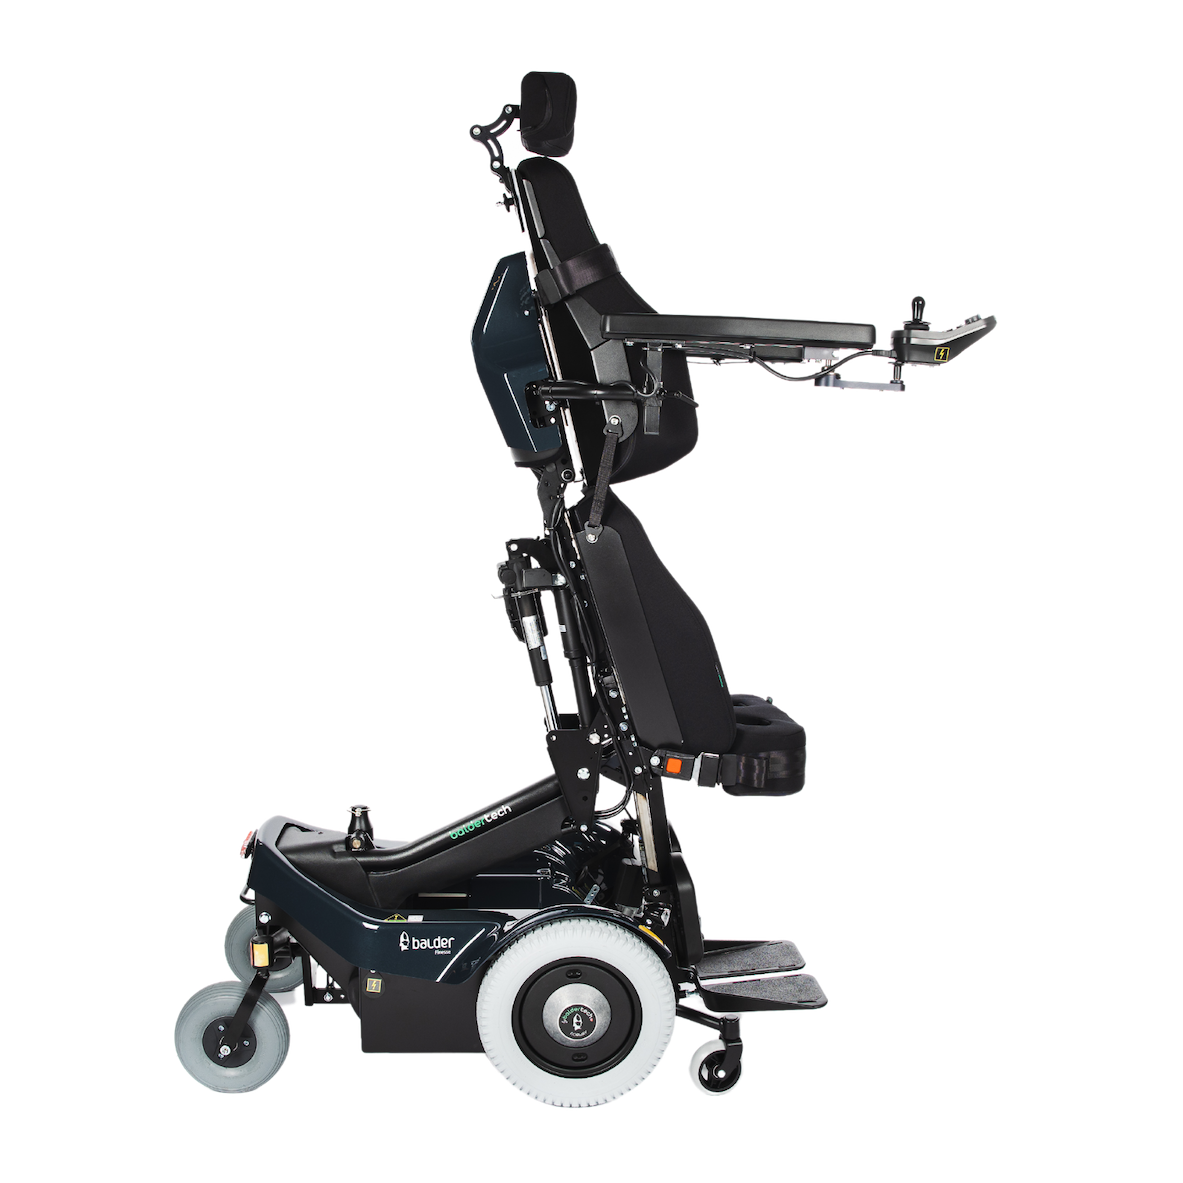 Balder Finesse F390 - A standing powerchair shown in a standing position. 